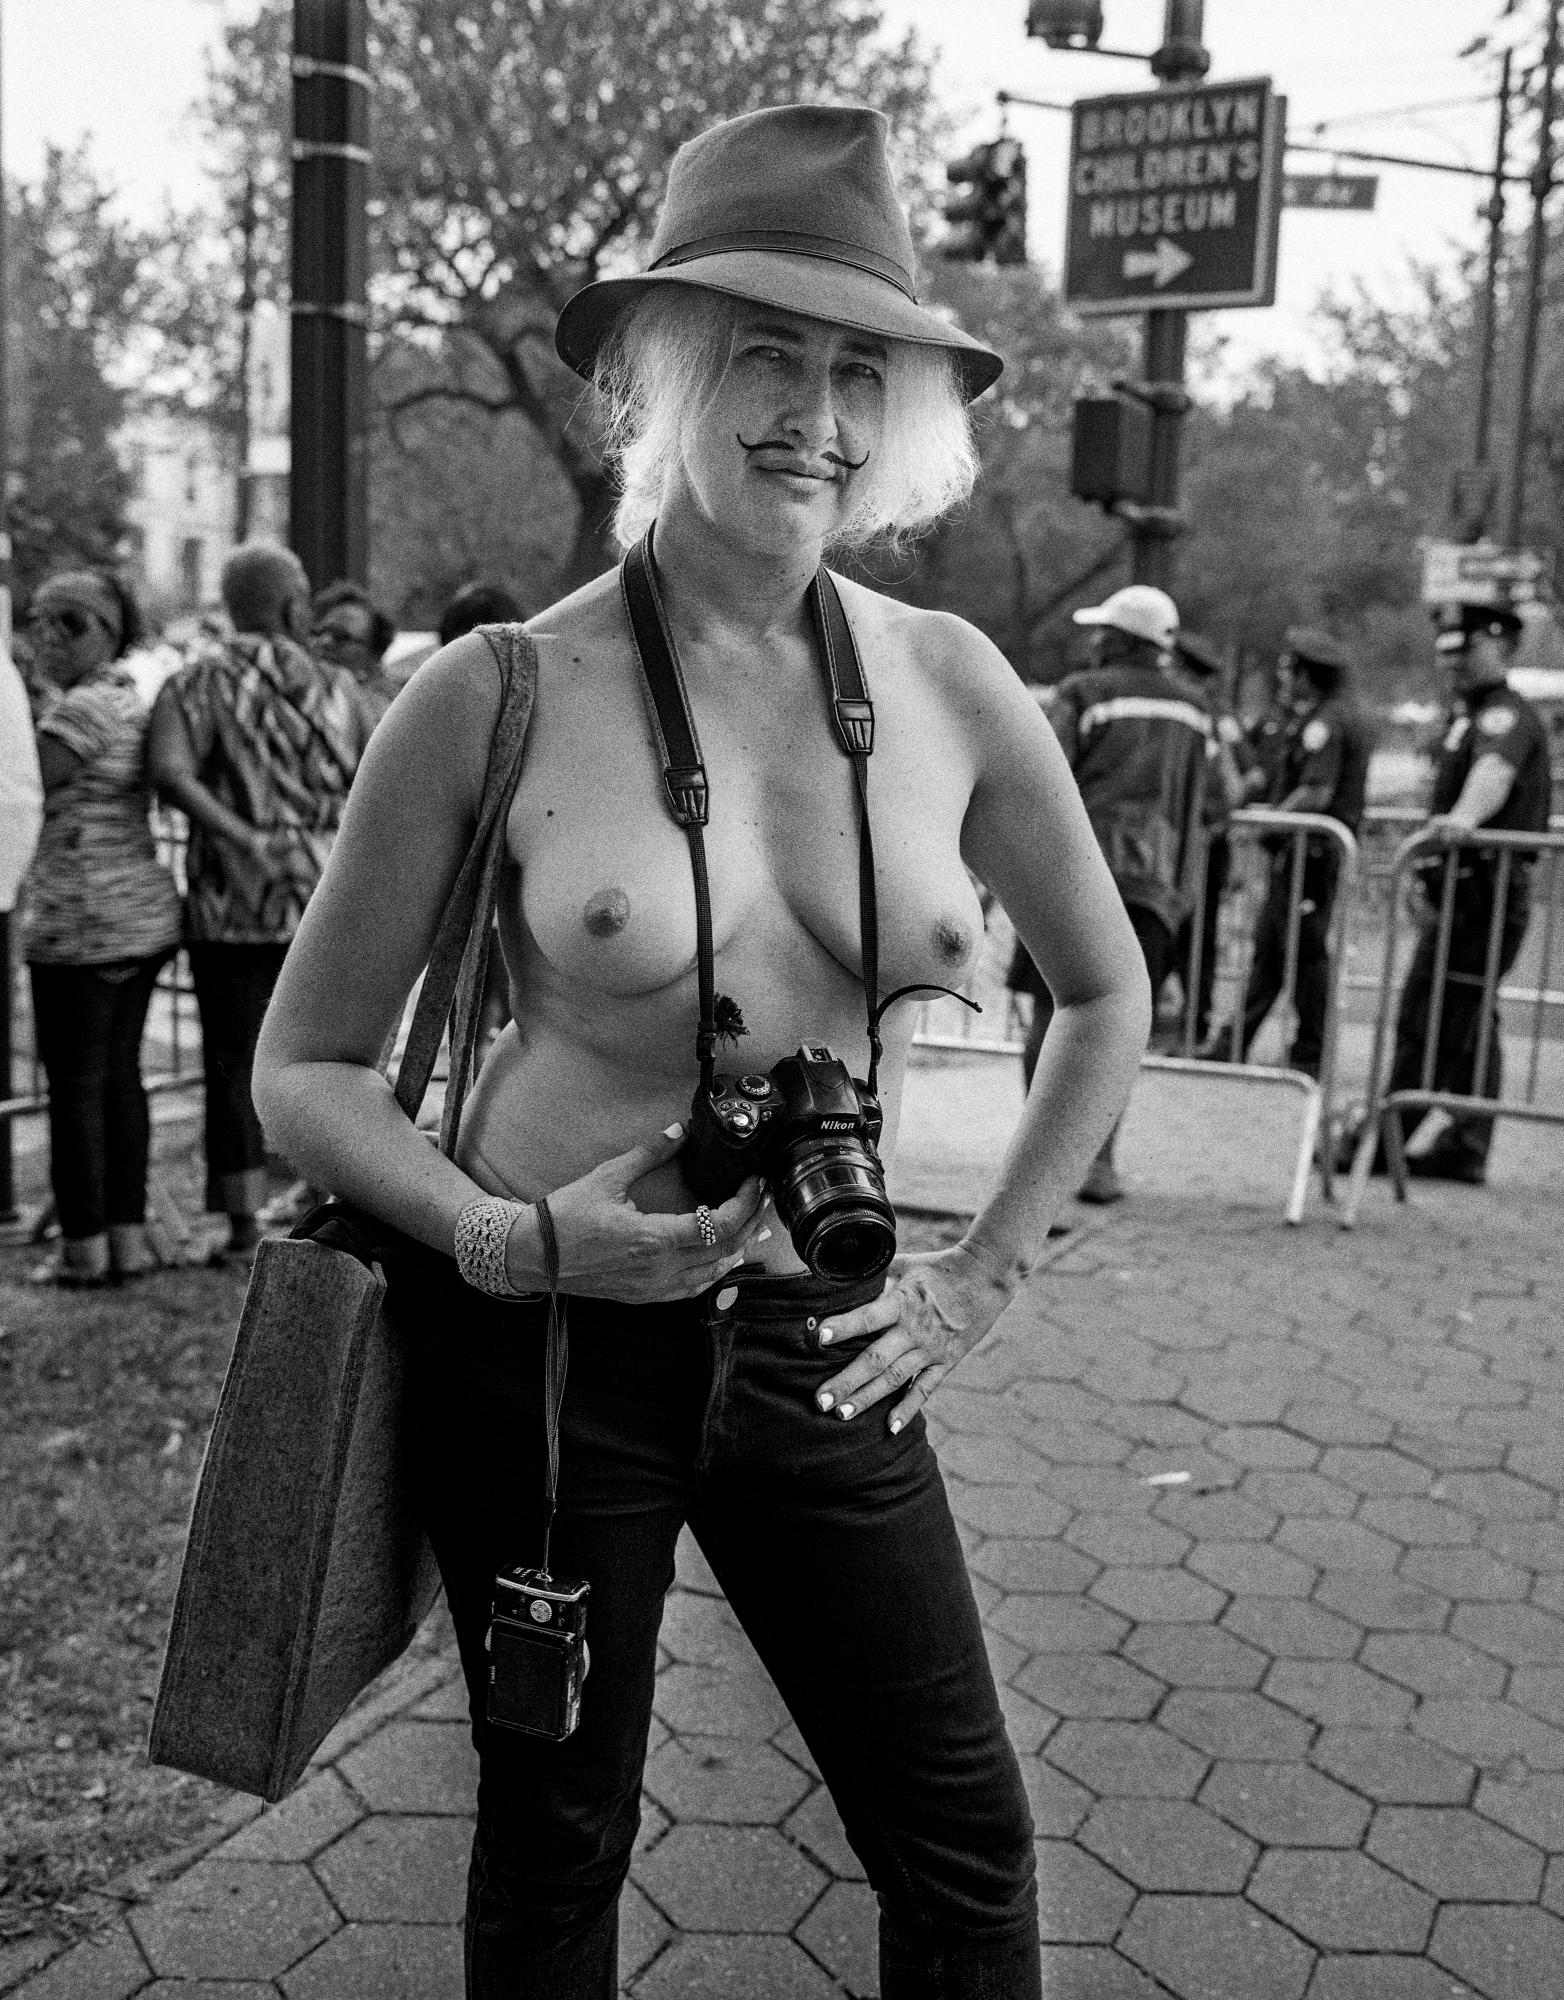 Street Photography/BW Works -  Holly Van Voast  West Indian American Day Parade,...